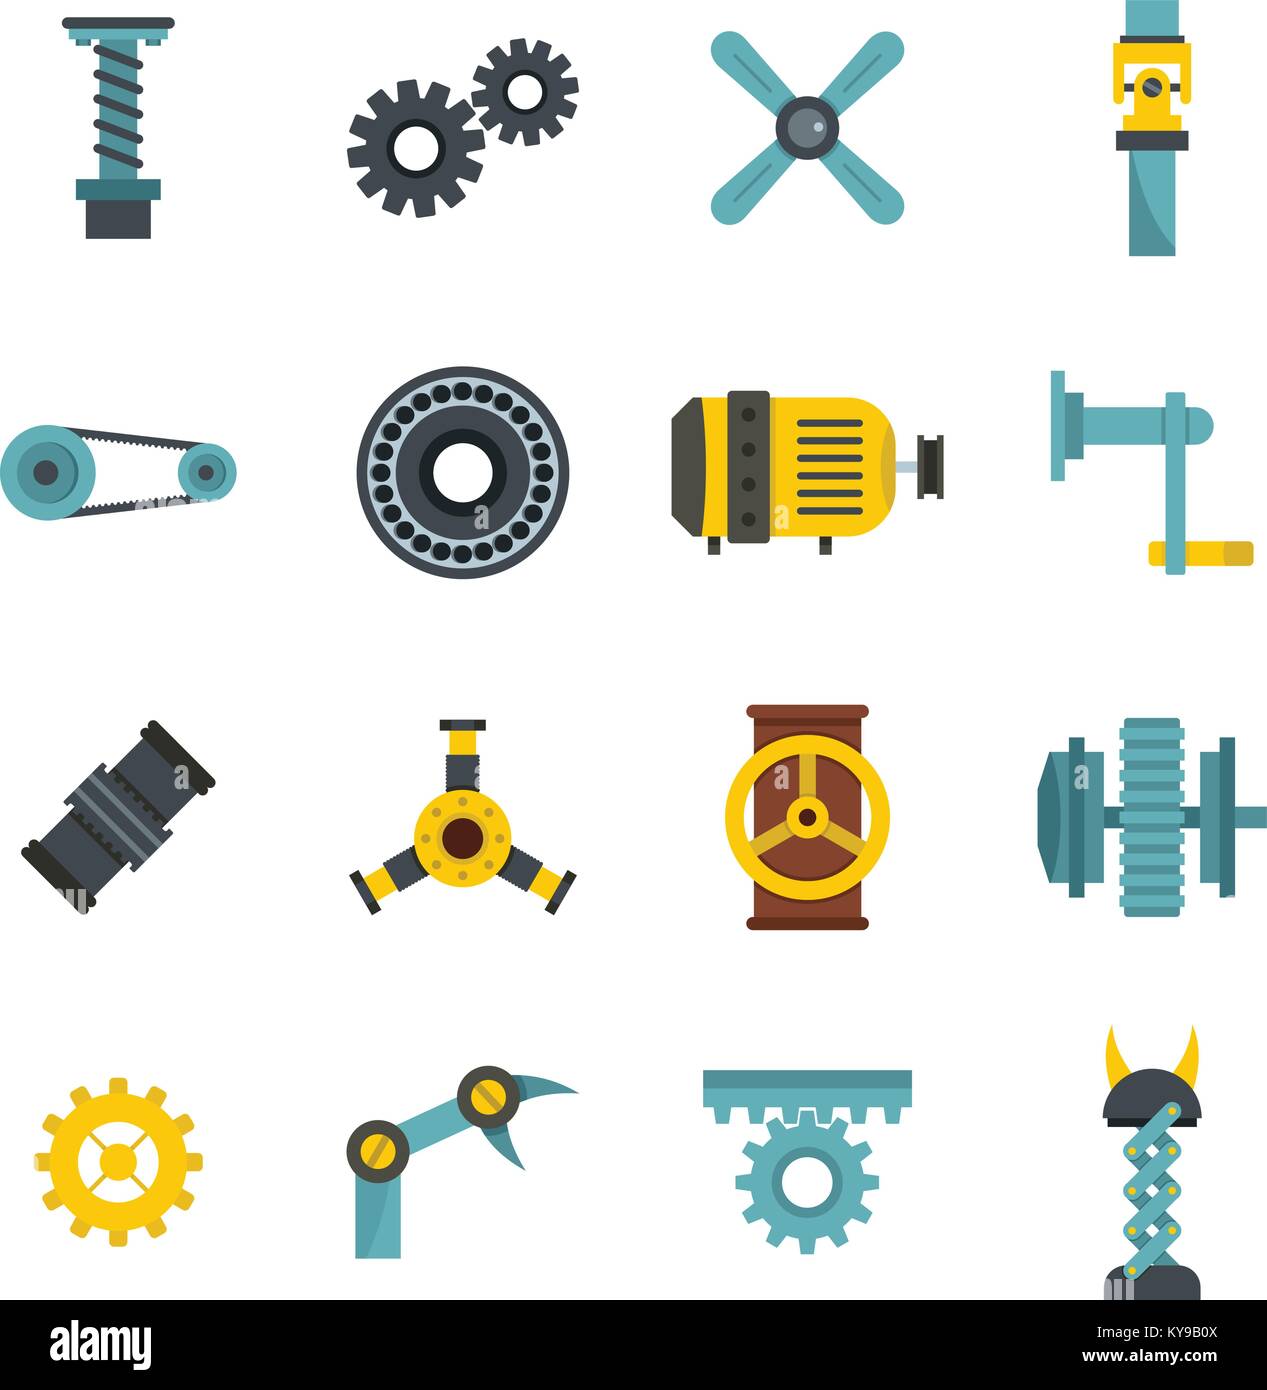 Techno mechanisms kit icons set in flat style isolated vector illustration Stock Vector